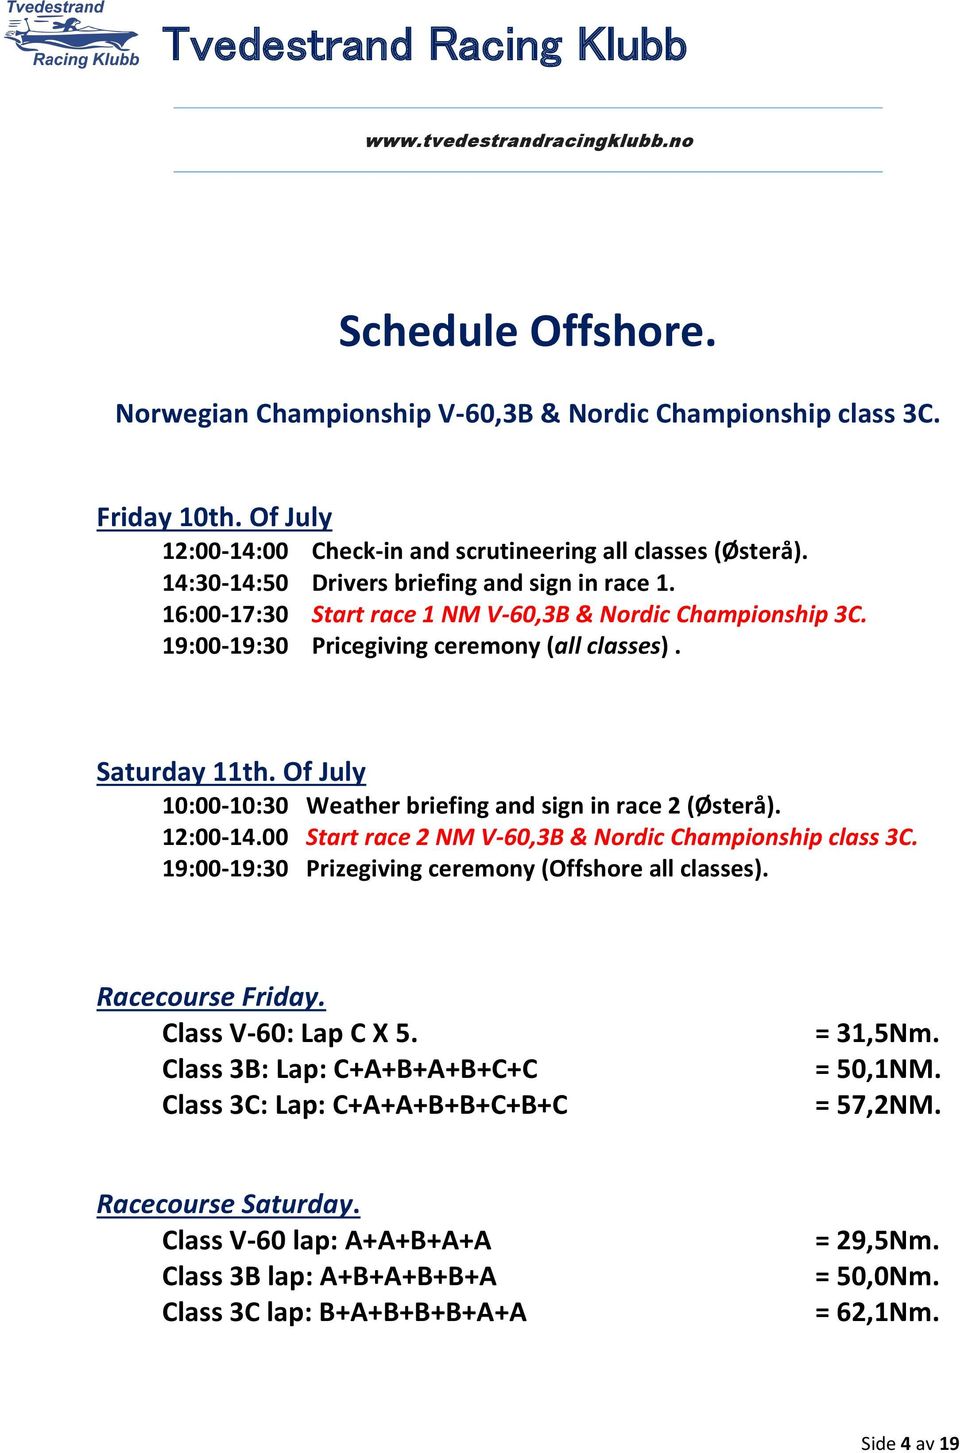 Of July 10:00-10:30 Weather briefing and sign in race 2 (Østerå). 12:00-14.00 Start race 2 NM V-60,3B & Nordic Championship class 3C. 19:00-19:30 Prizegiving ceremony (Offshore all classes).